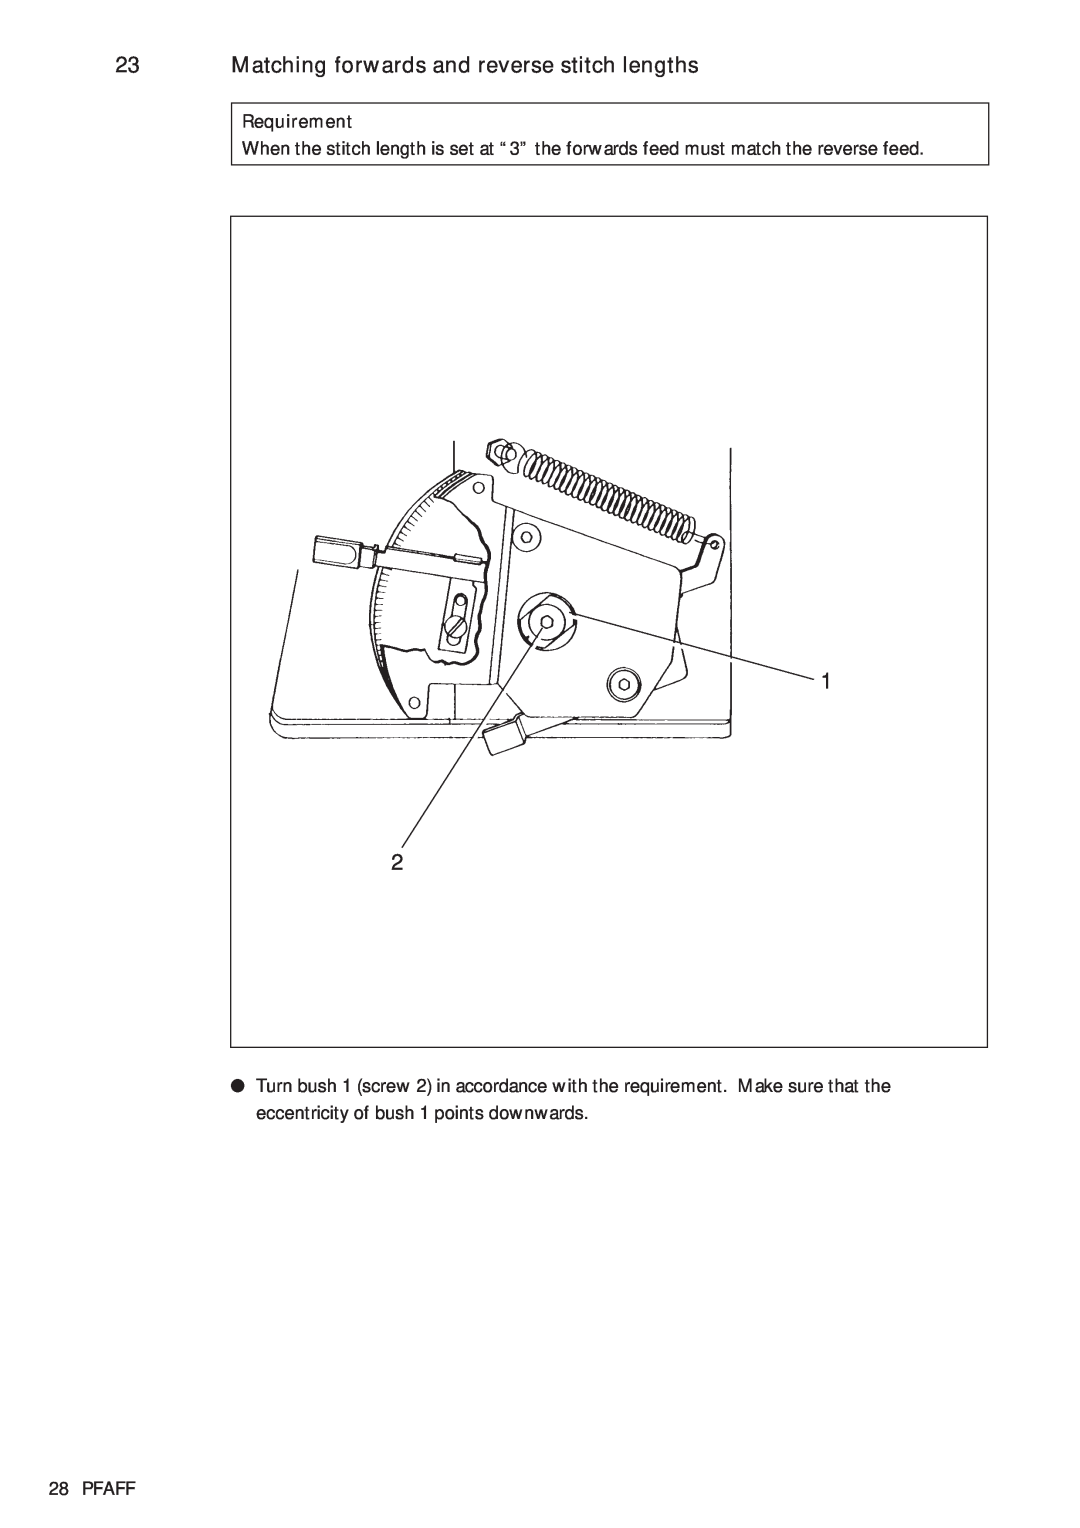 Pfaff 481, 483 service manual Matching forwards and reverse stitch lengths, Requirement, Pfaff 